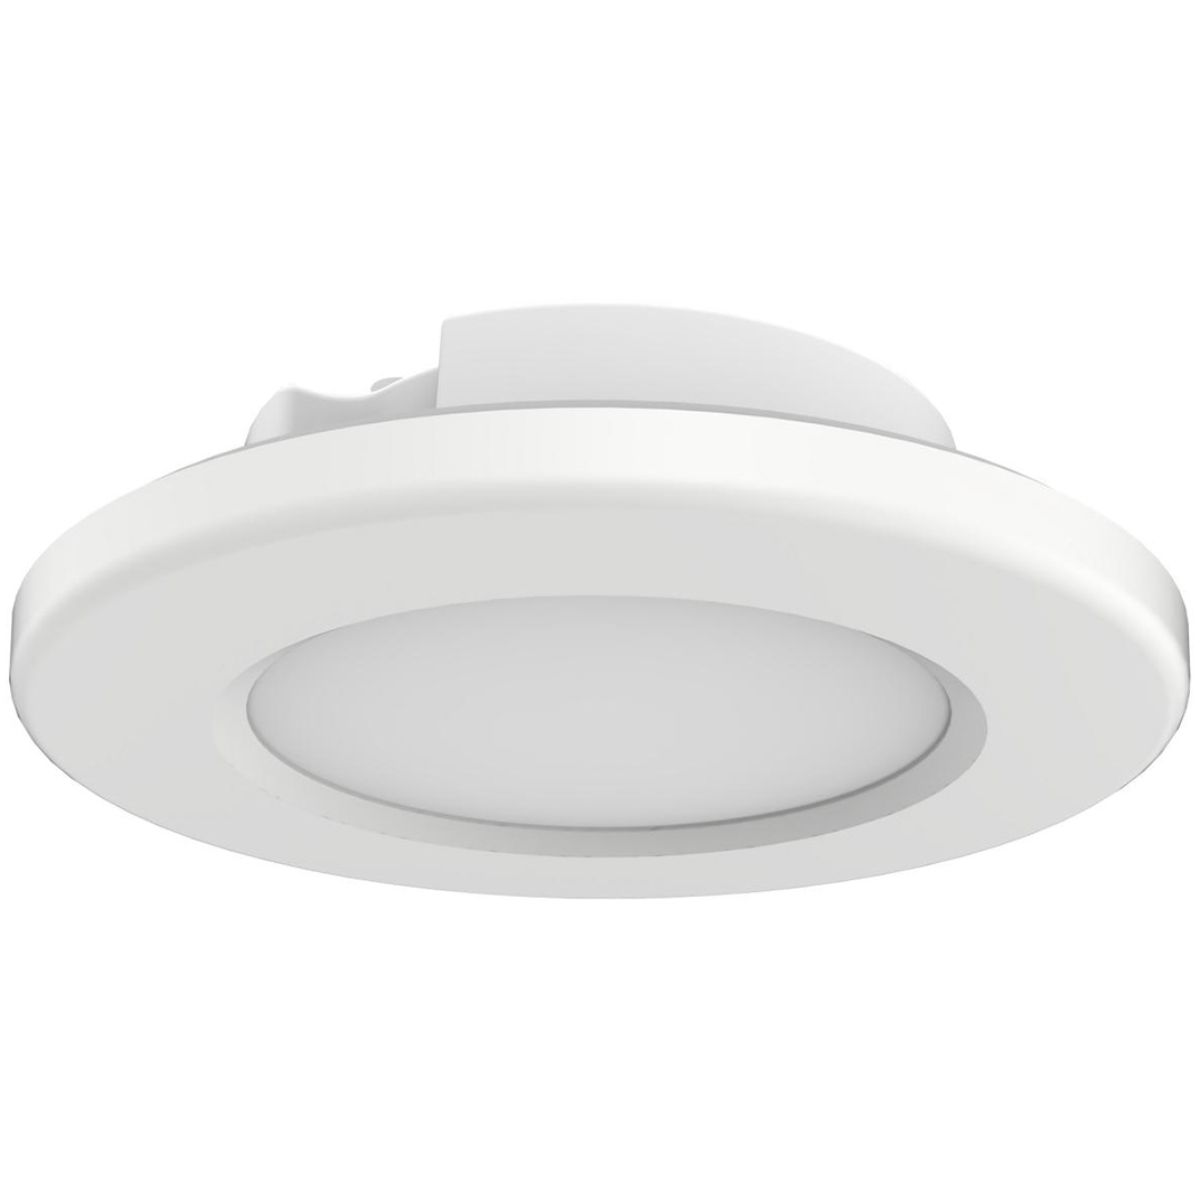 4 In. LED Disk / Surface Mount Light 3000K White Finish Contractor Pack Of 6